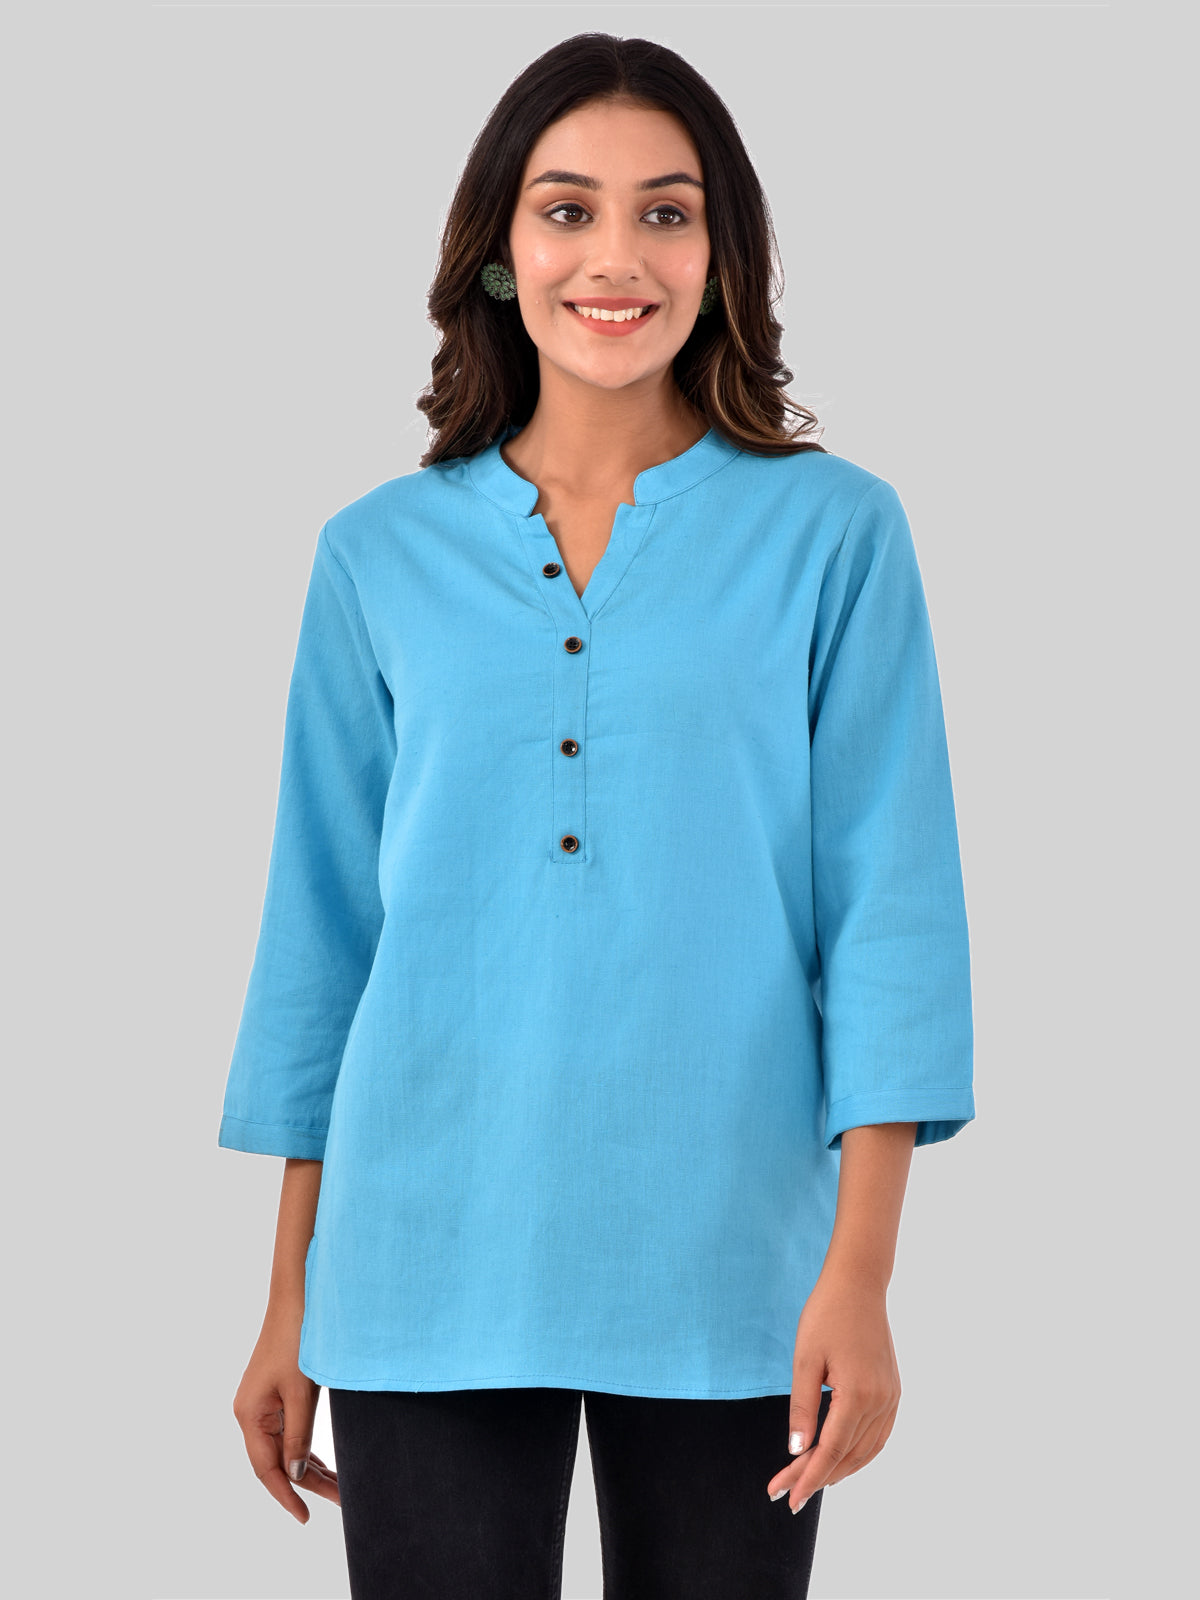 Womens Casual Three Fourth Sleeves Solid Turquoise Cotton Tops